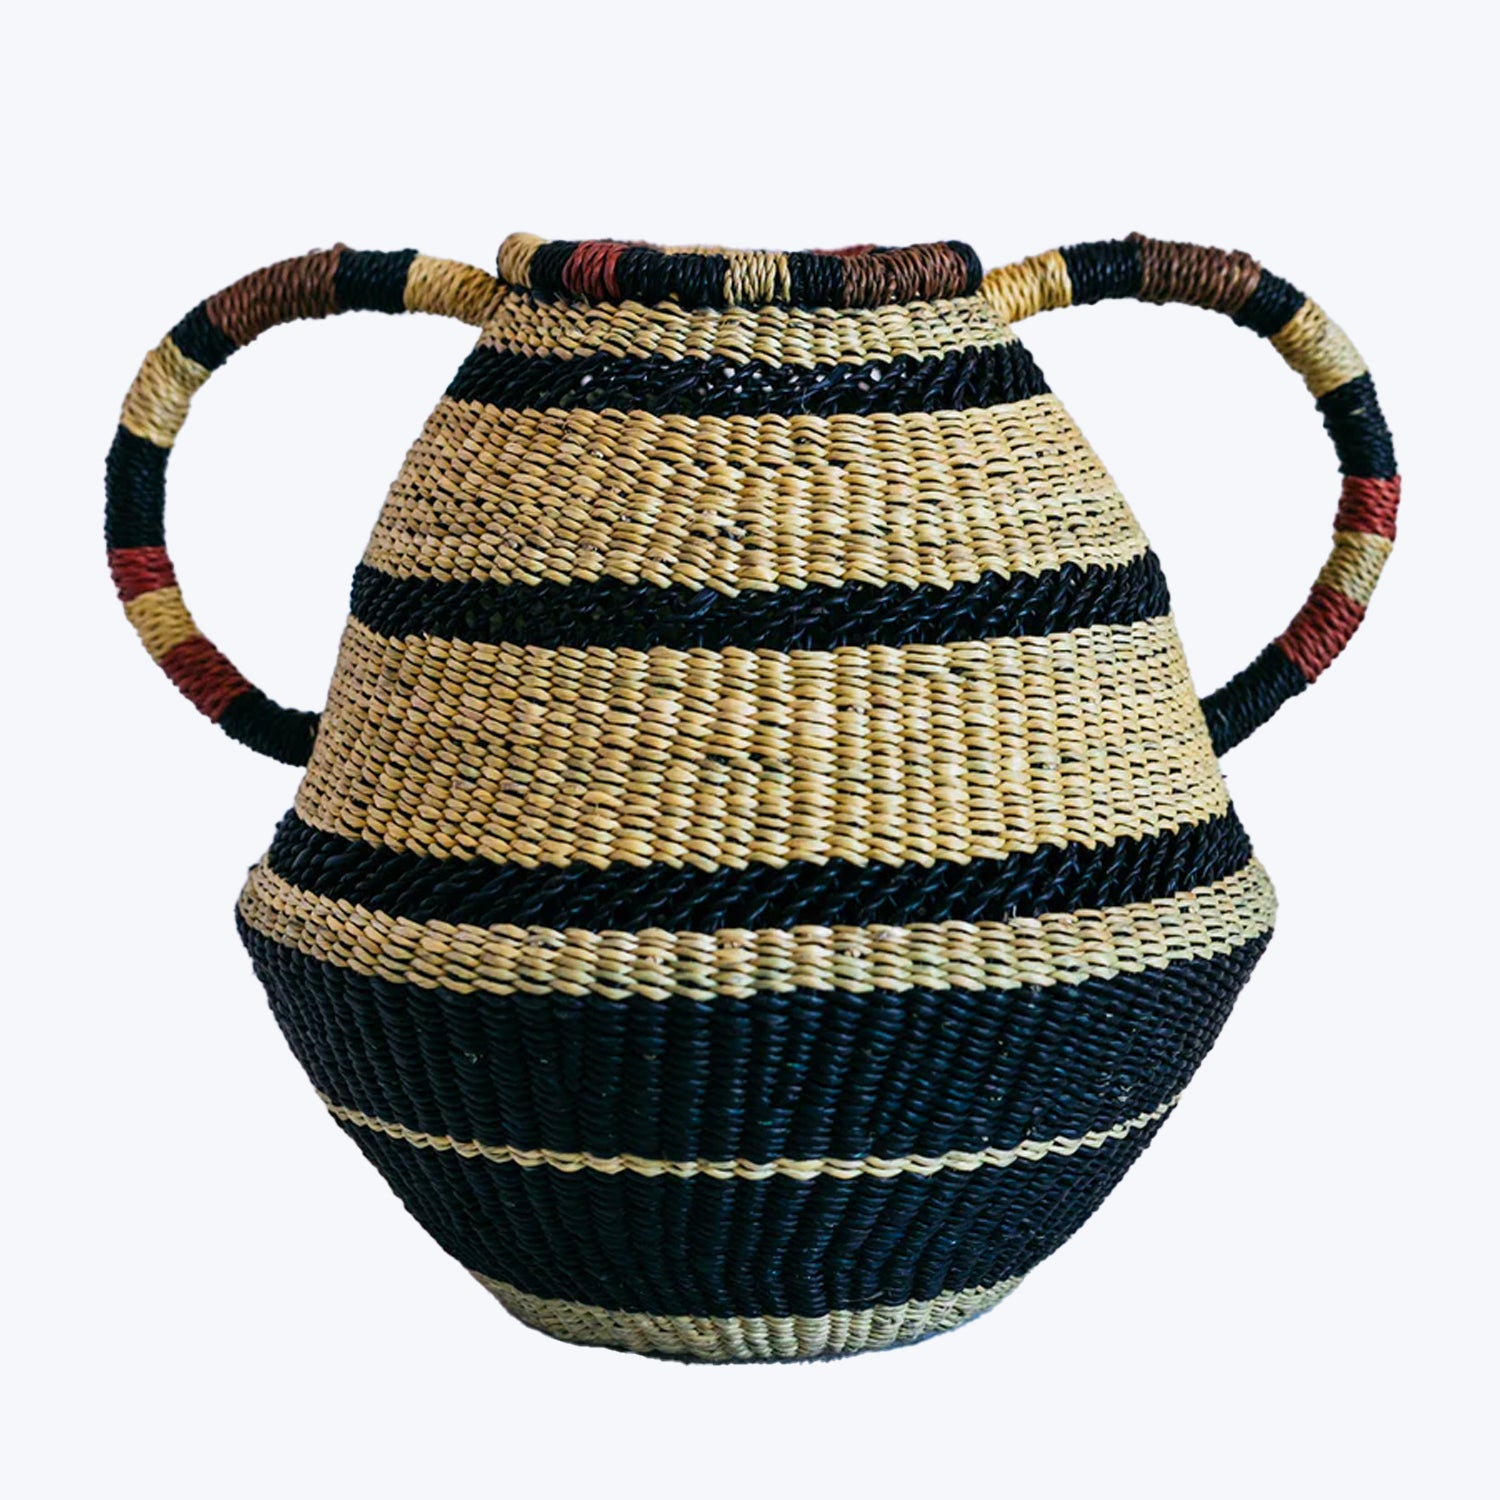 Handcrafted woven basket with precision stripes and decorative handle.